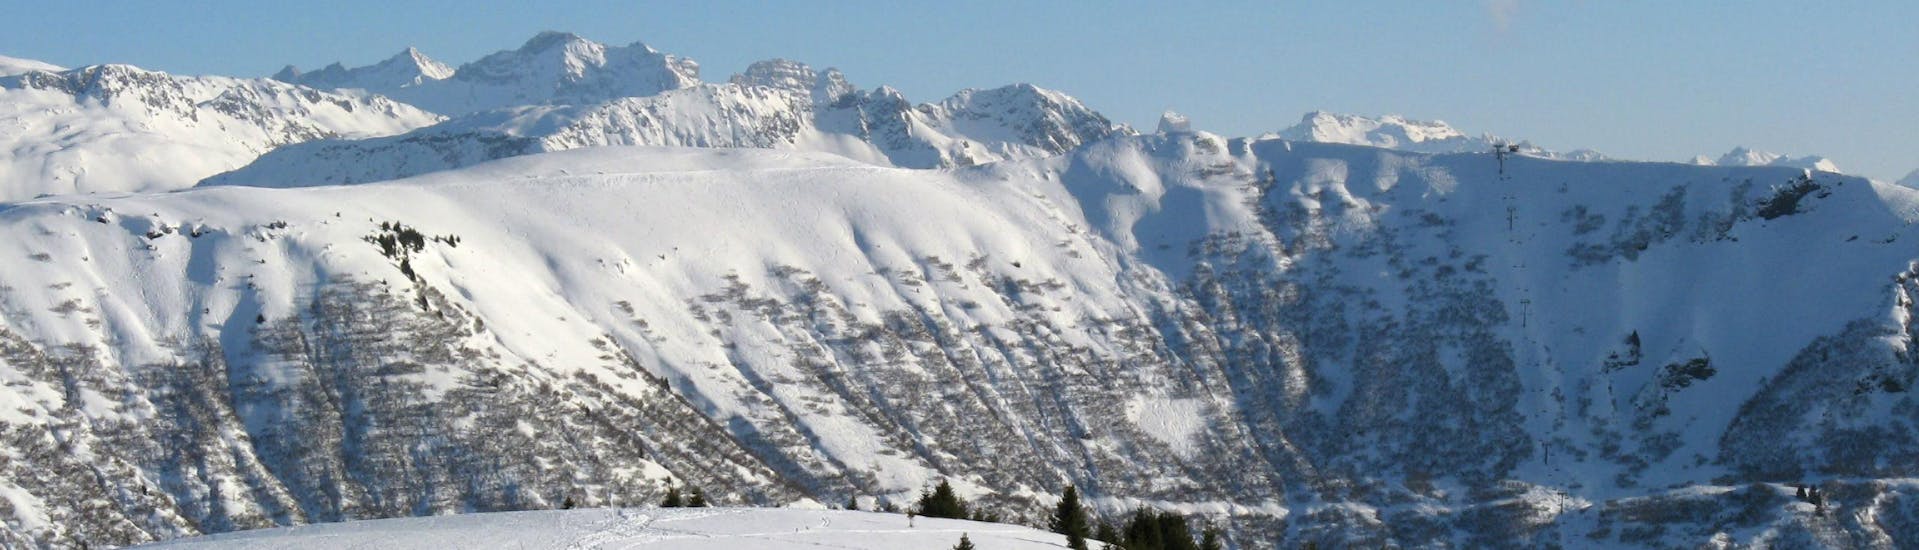 A picturesque view of ski slopes of Notre Dame de Bellecombe, a French ski resort nestled between the majestic peaks of the Savoy department, where local ski schools offer a broad range of ski lessons for anyone who wishes to learn to ski.